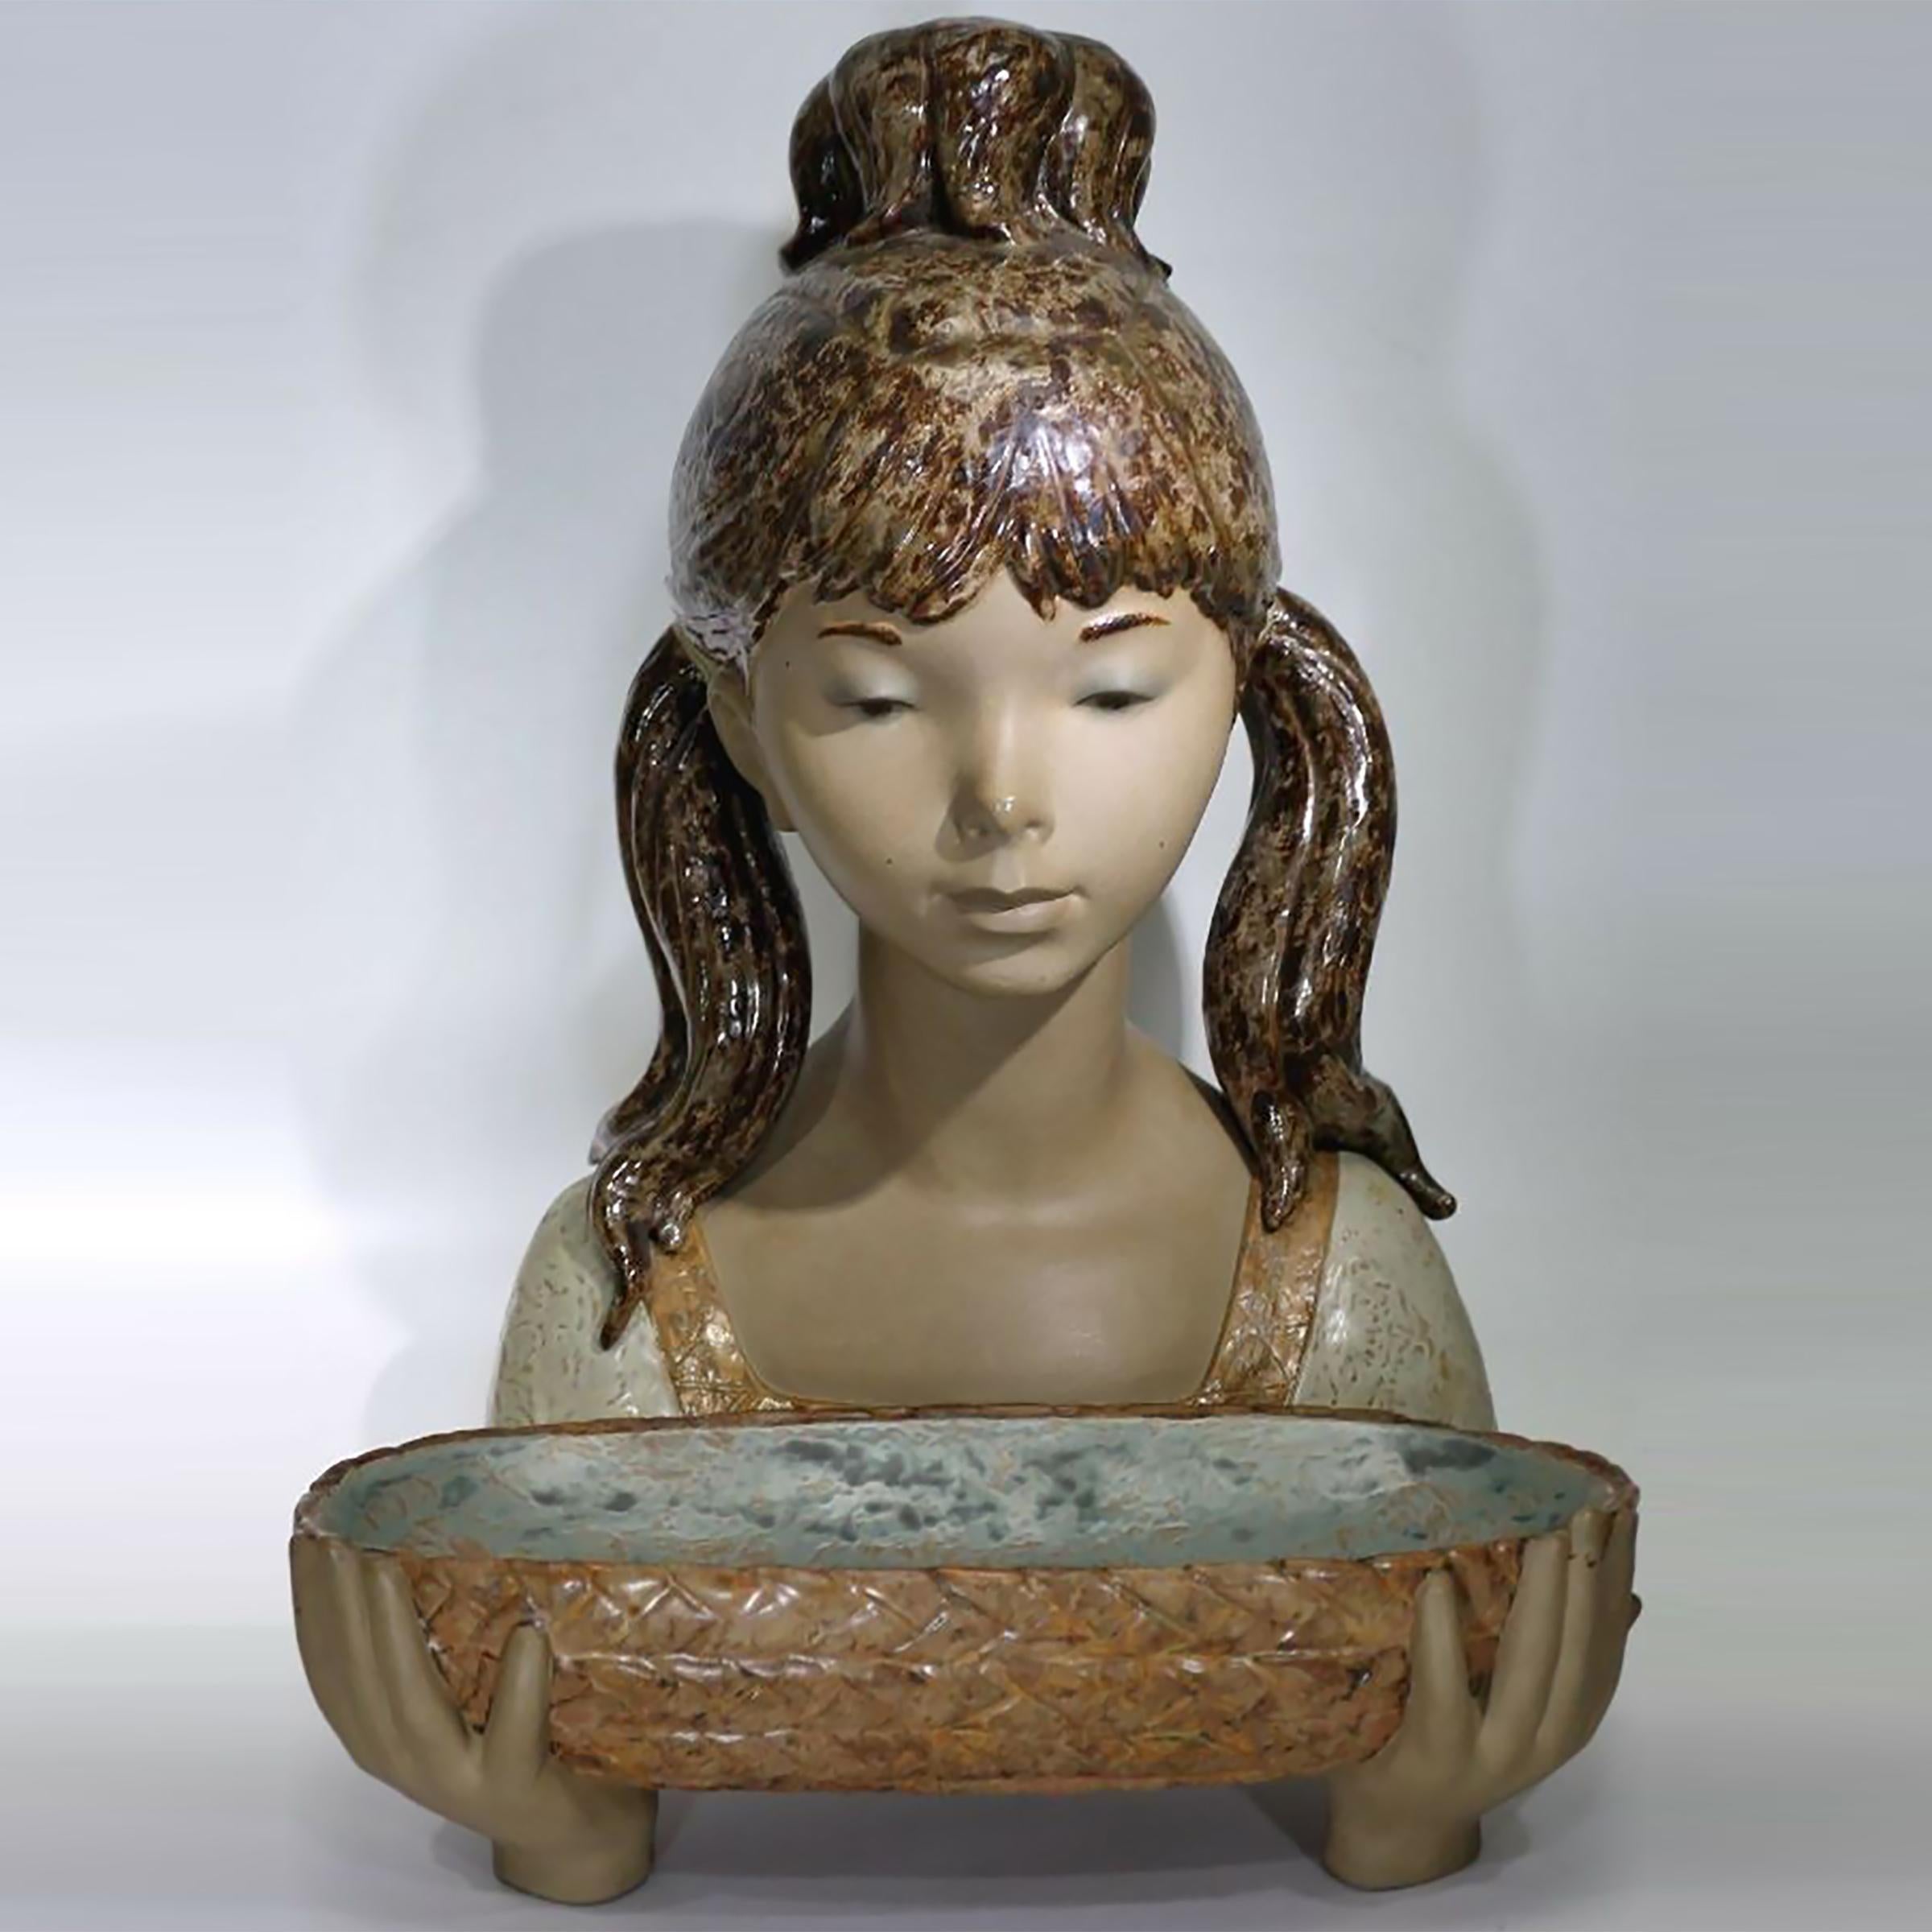 The figure consists of 2 parts, the main part is a life-size young girl, the front part is a bowl that the girl is apparently holding in her hands.

The pictures in different angles give an impression of how you should imagine the figure. 
Large